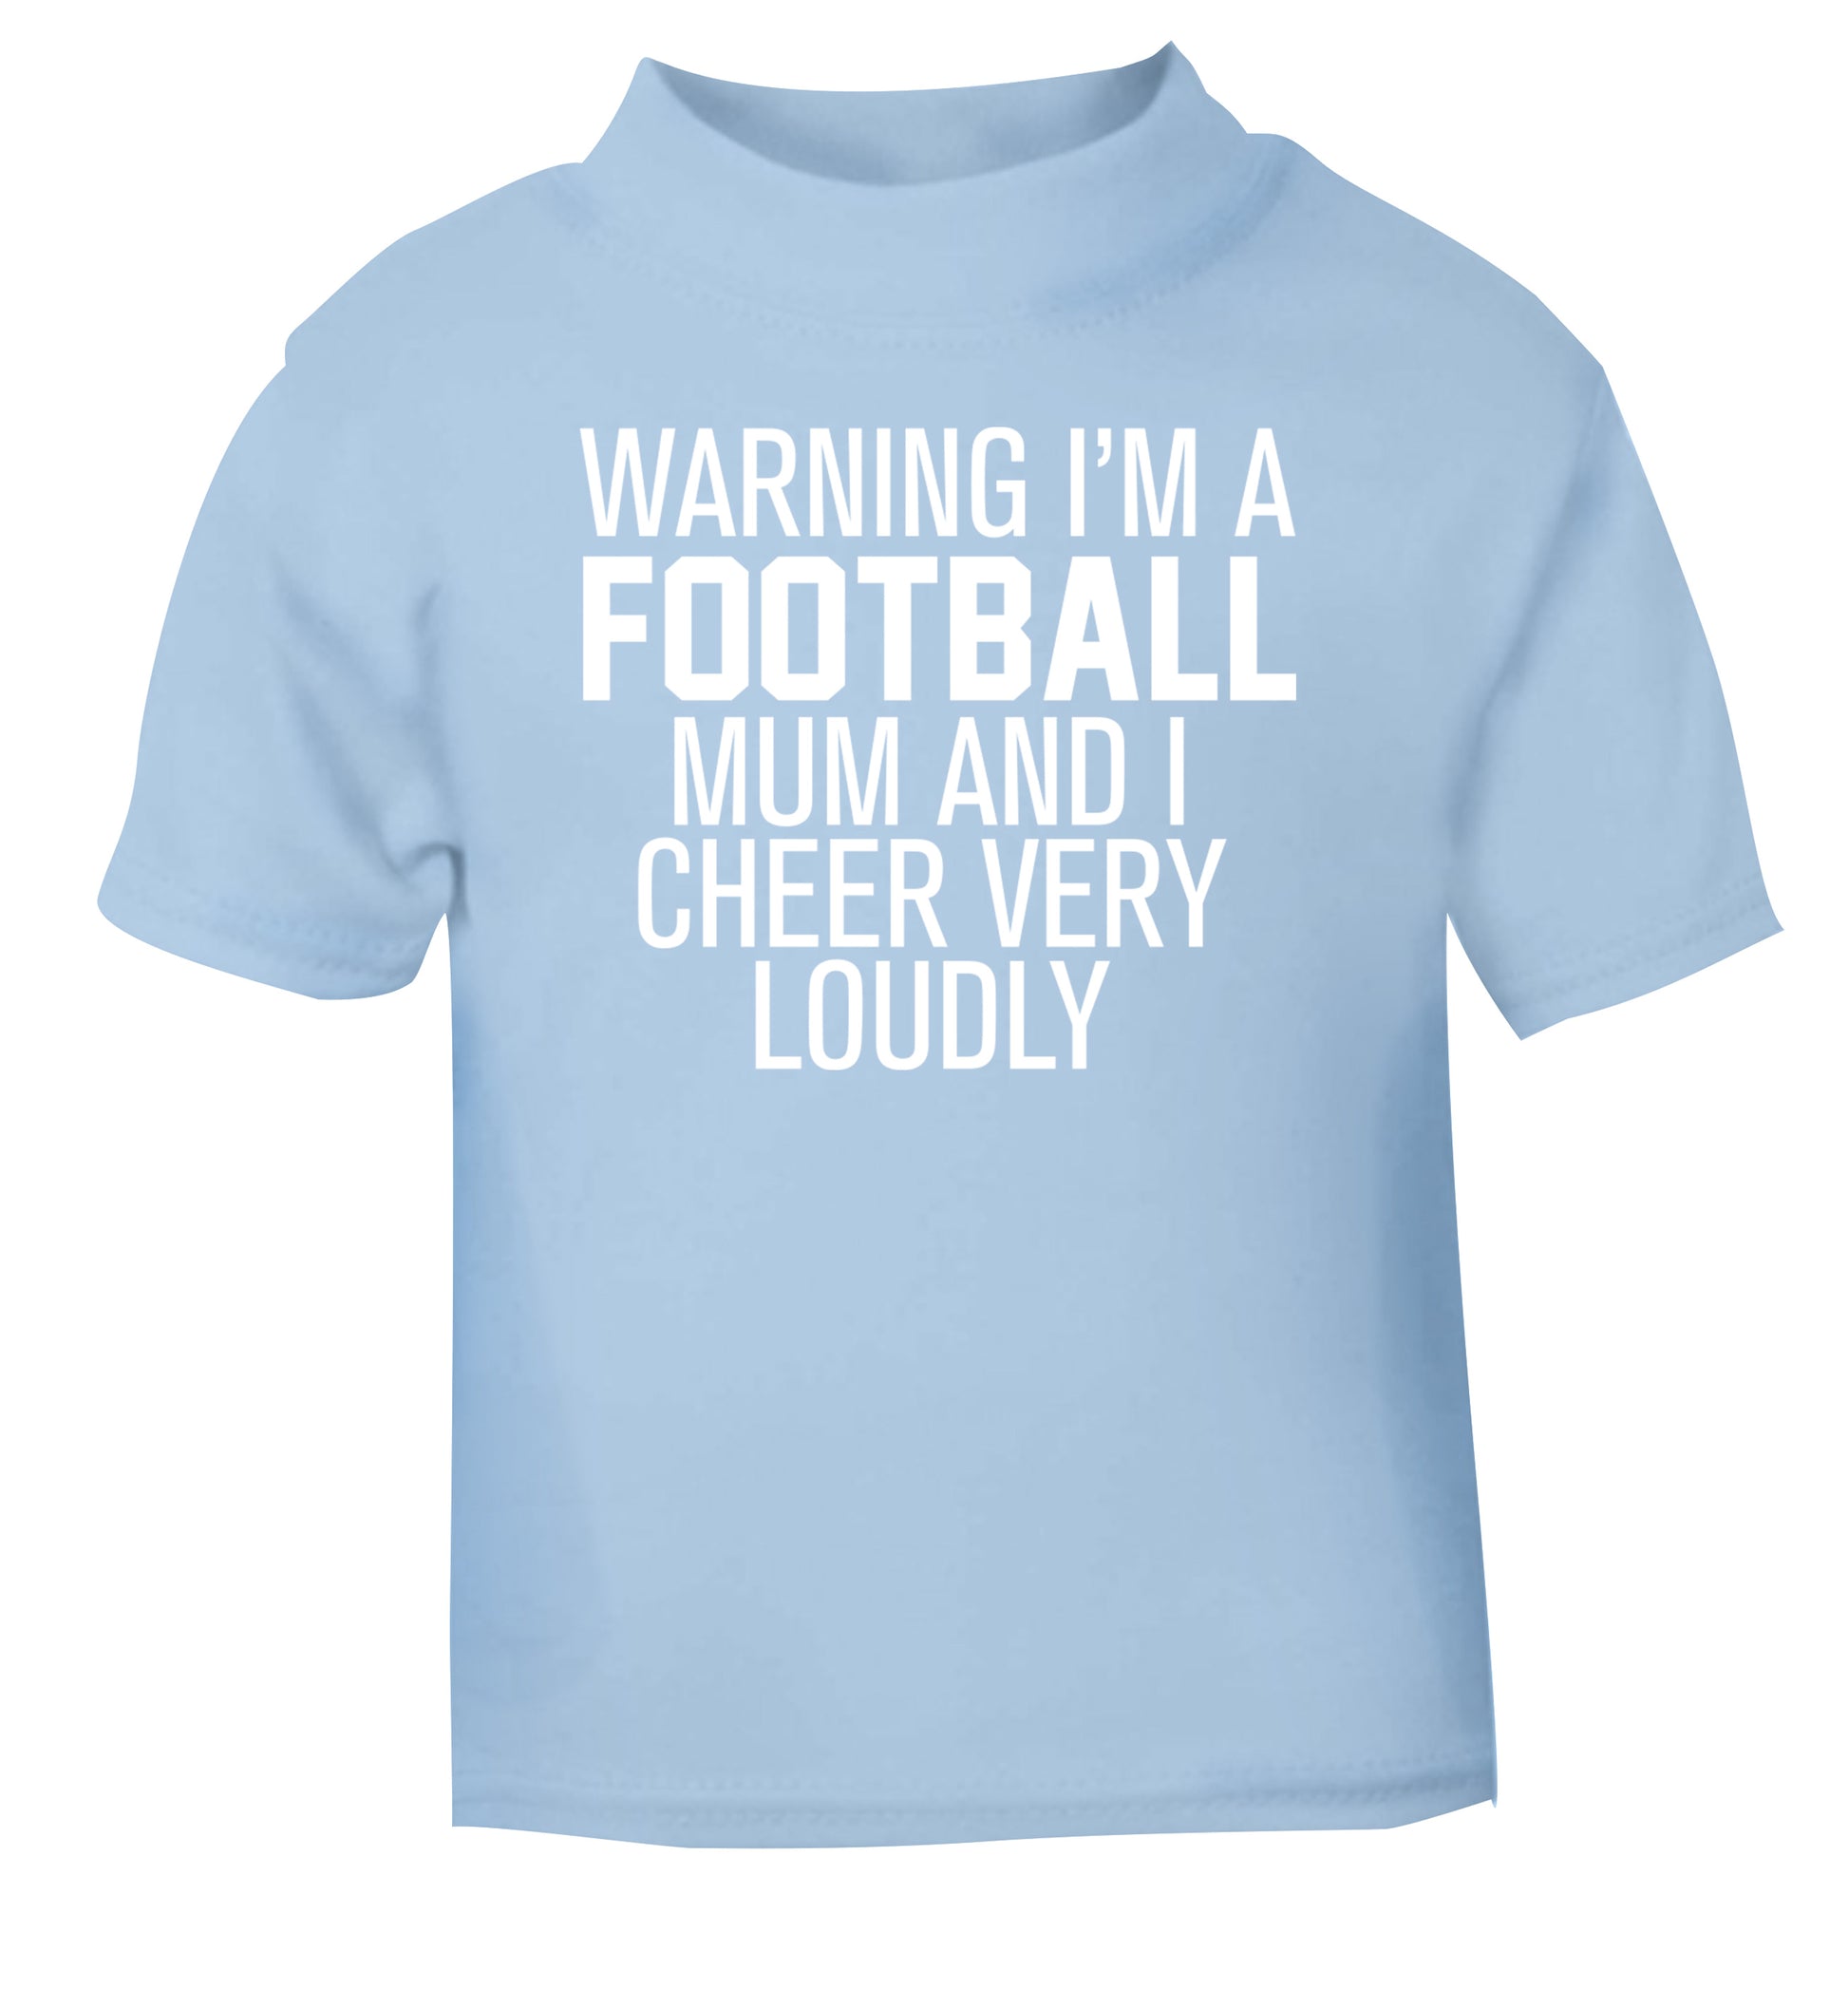 Warning I'm a football mum and I cheer very loudly light blue Baby Toddler Tshirt 2 Years